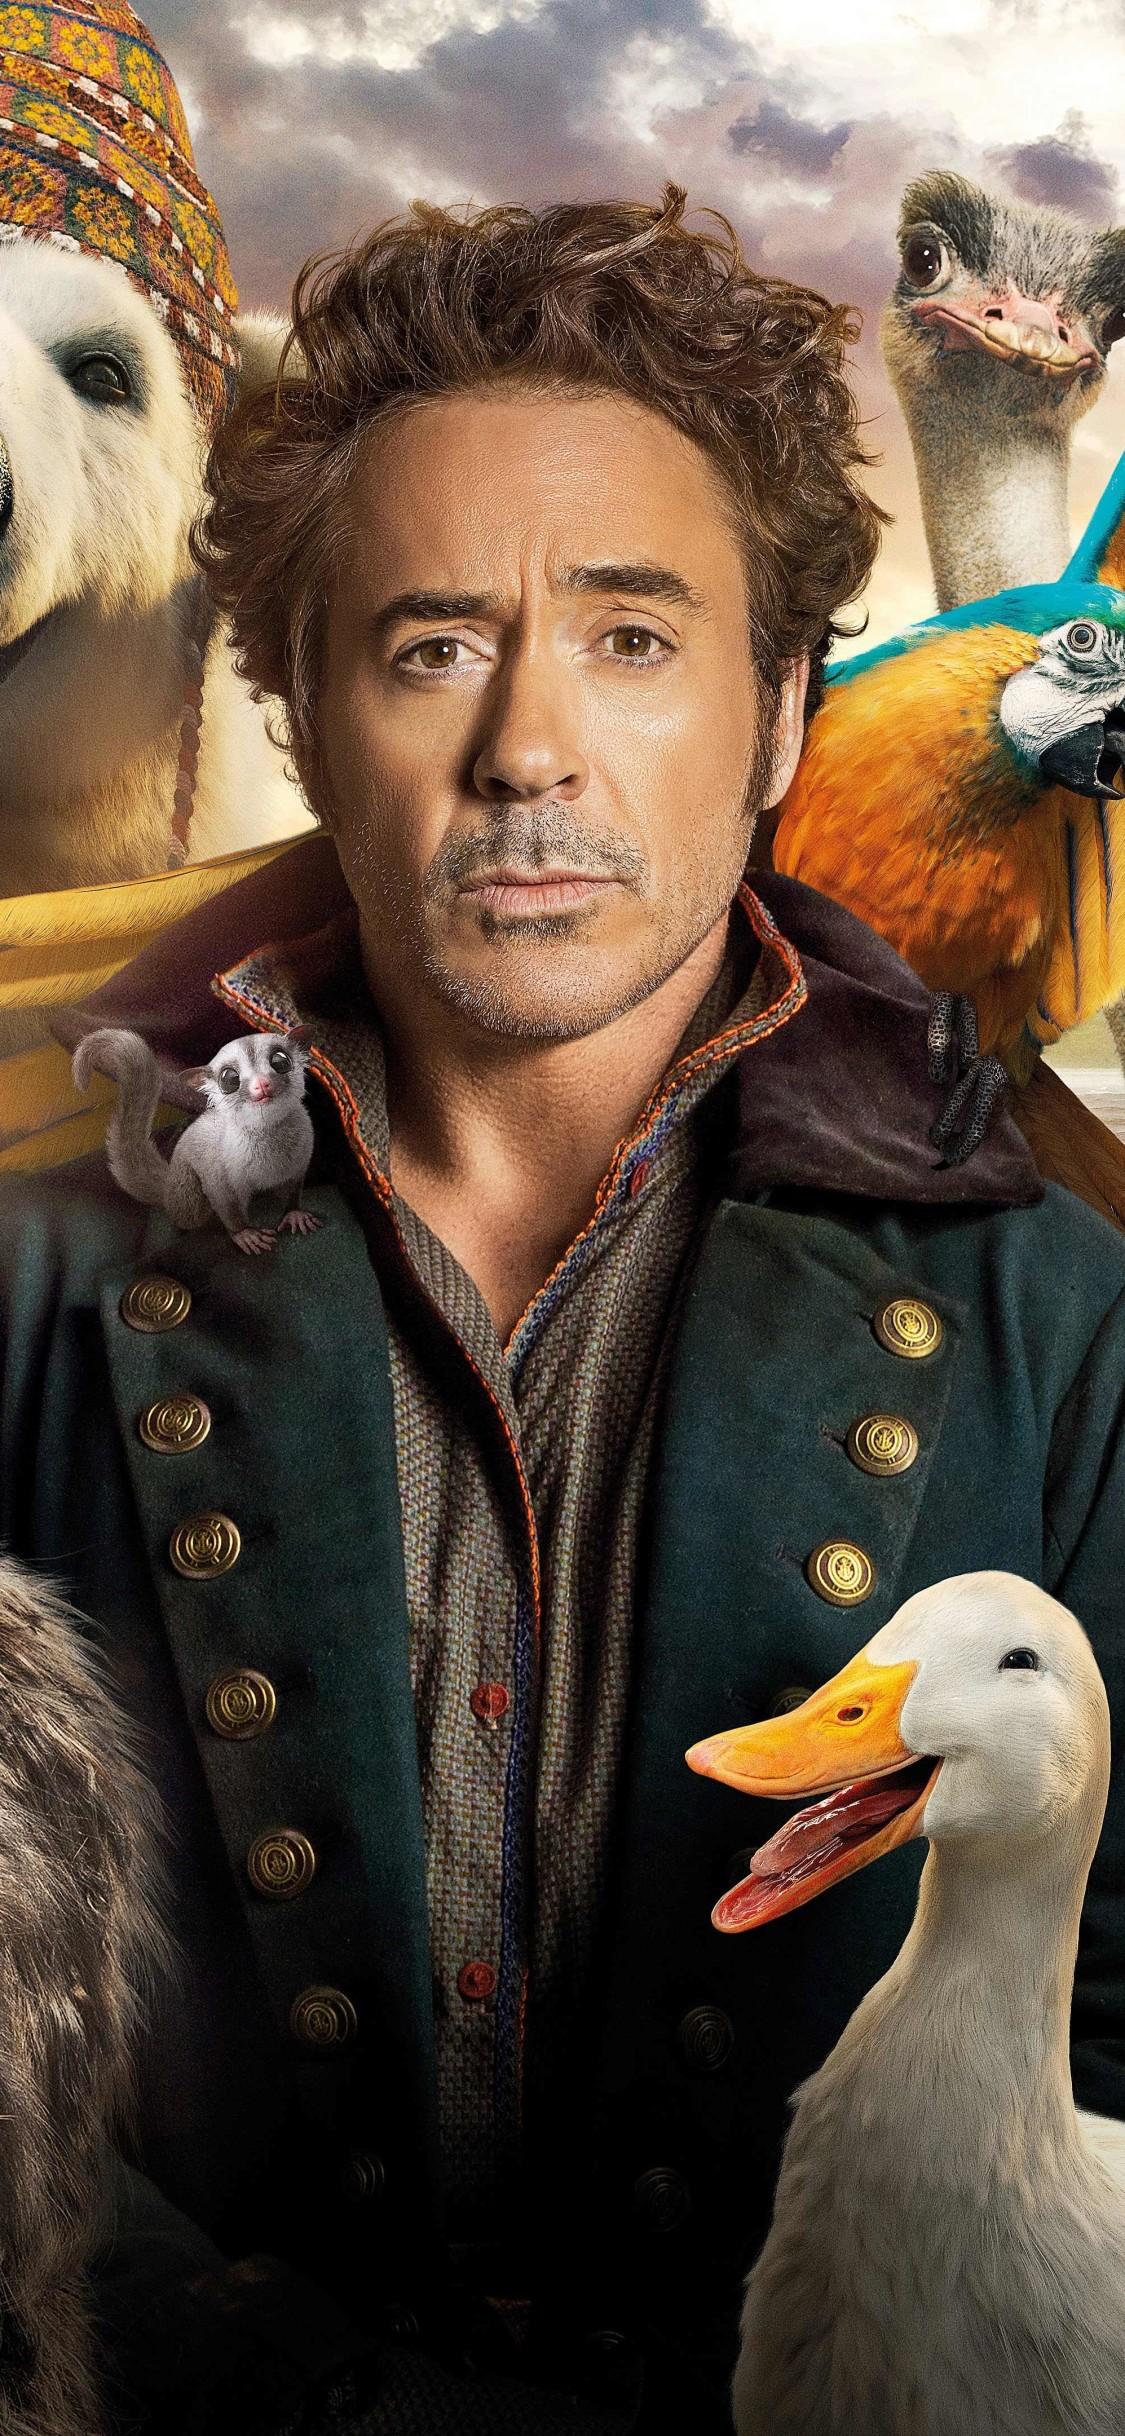 Dolittle 2020 Movie 8k iPhone XS, iPhone iPhone